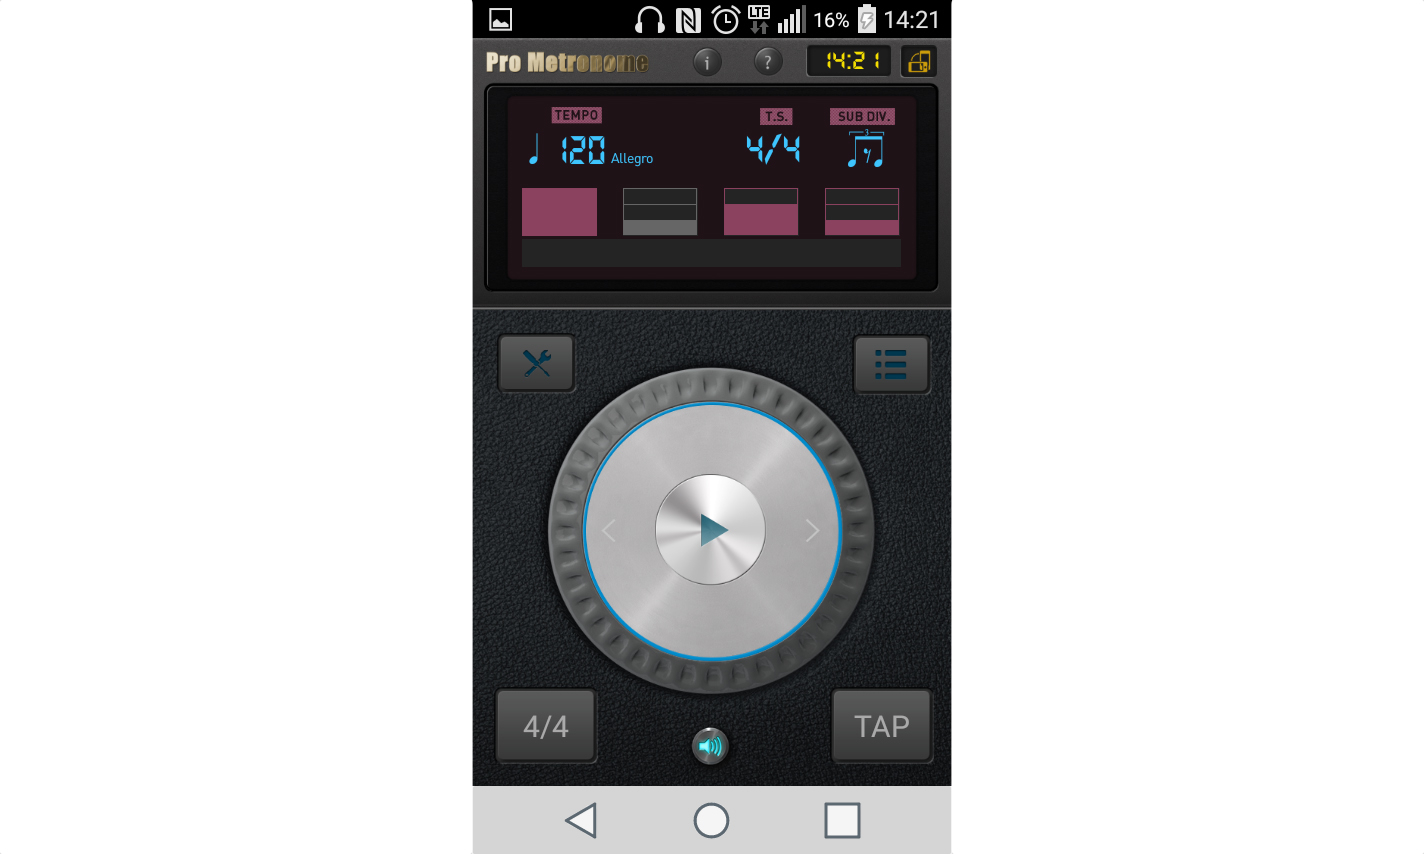 How To Use The Pro Metronome App